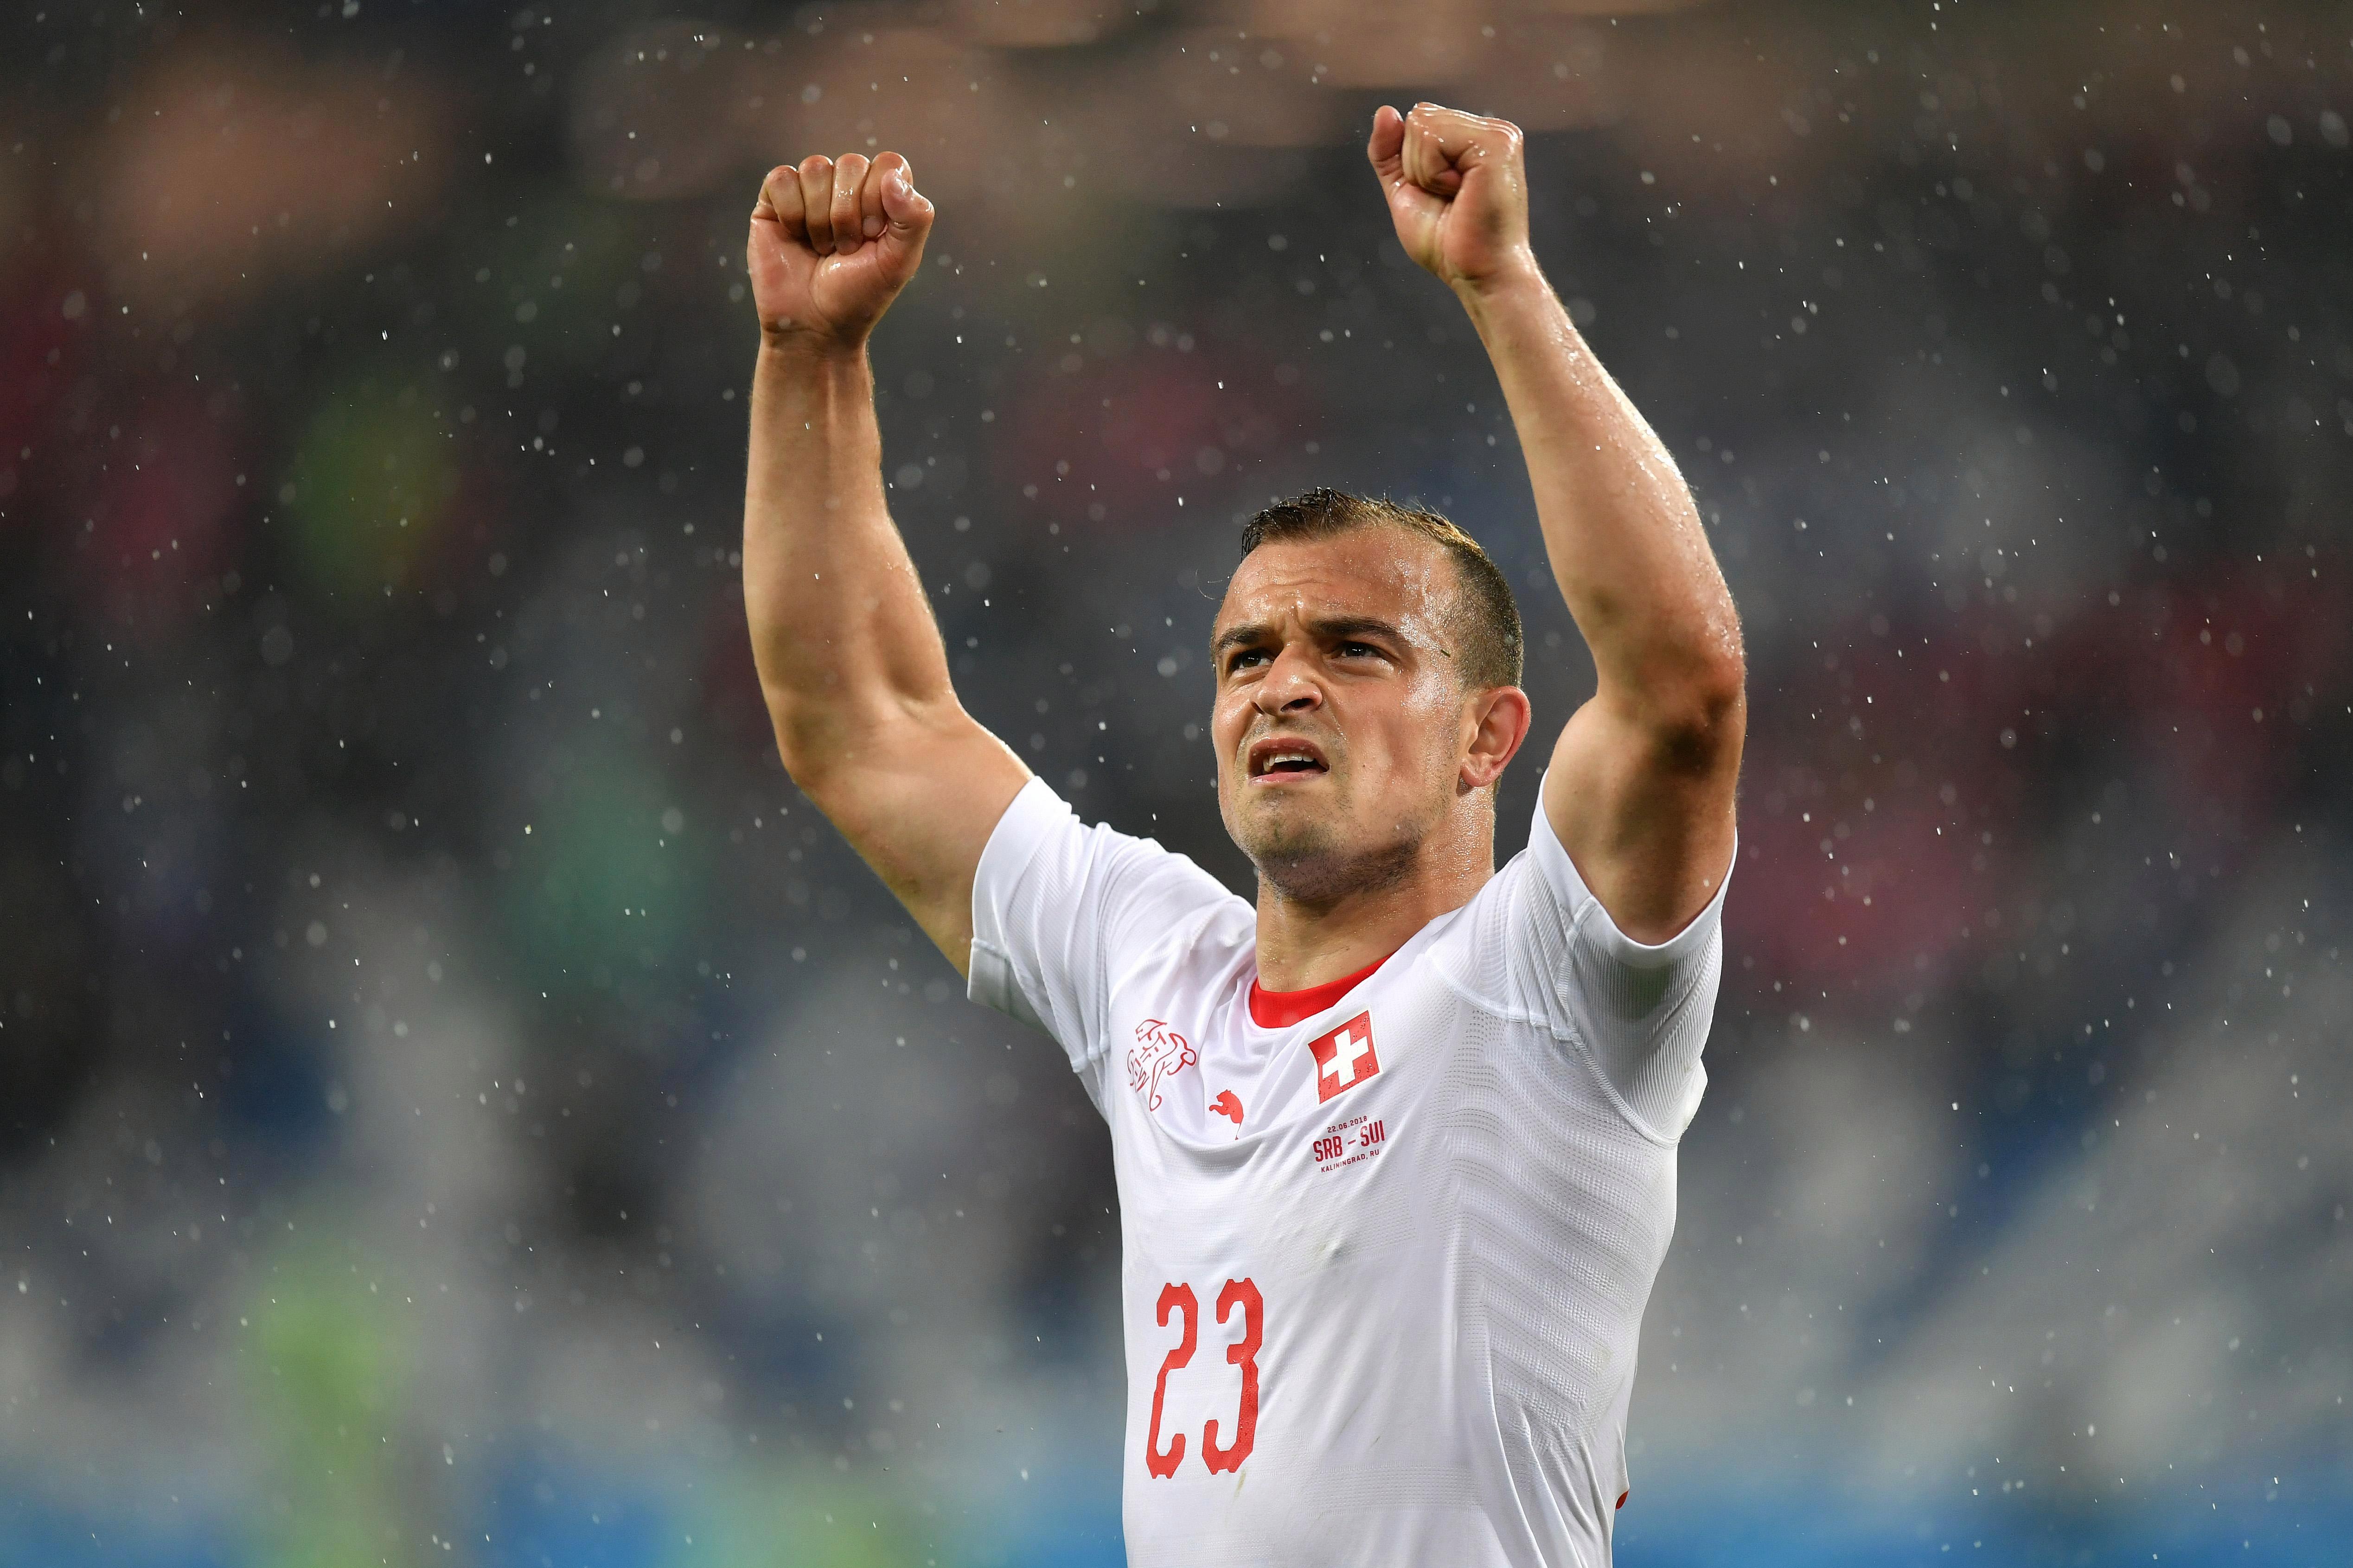 Liverpool sign Shaqiri from Stoke in £13m deal